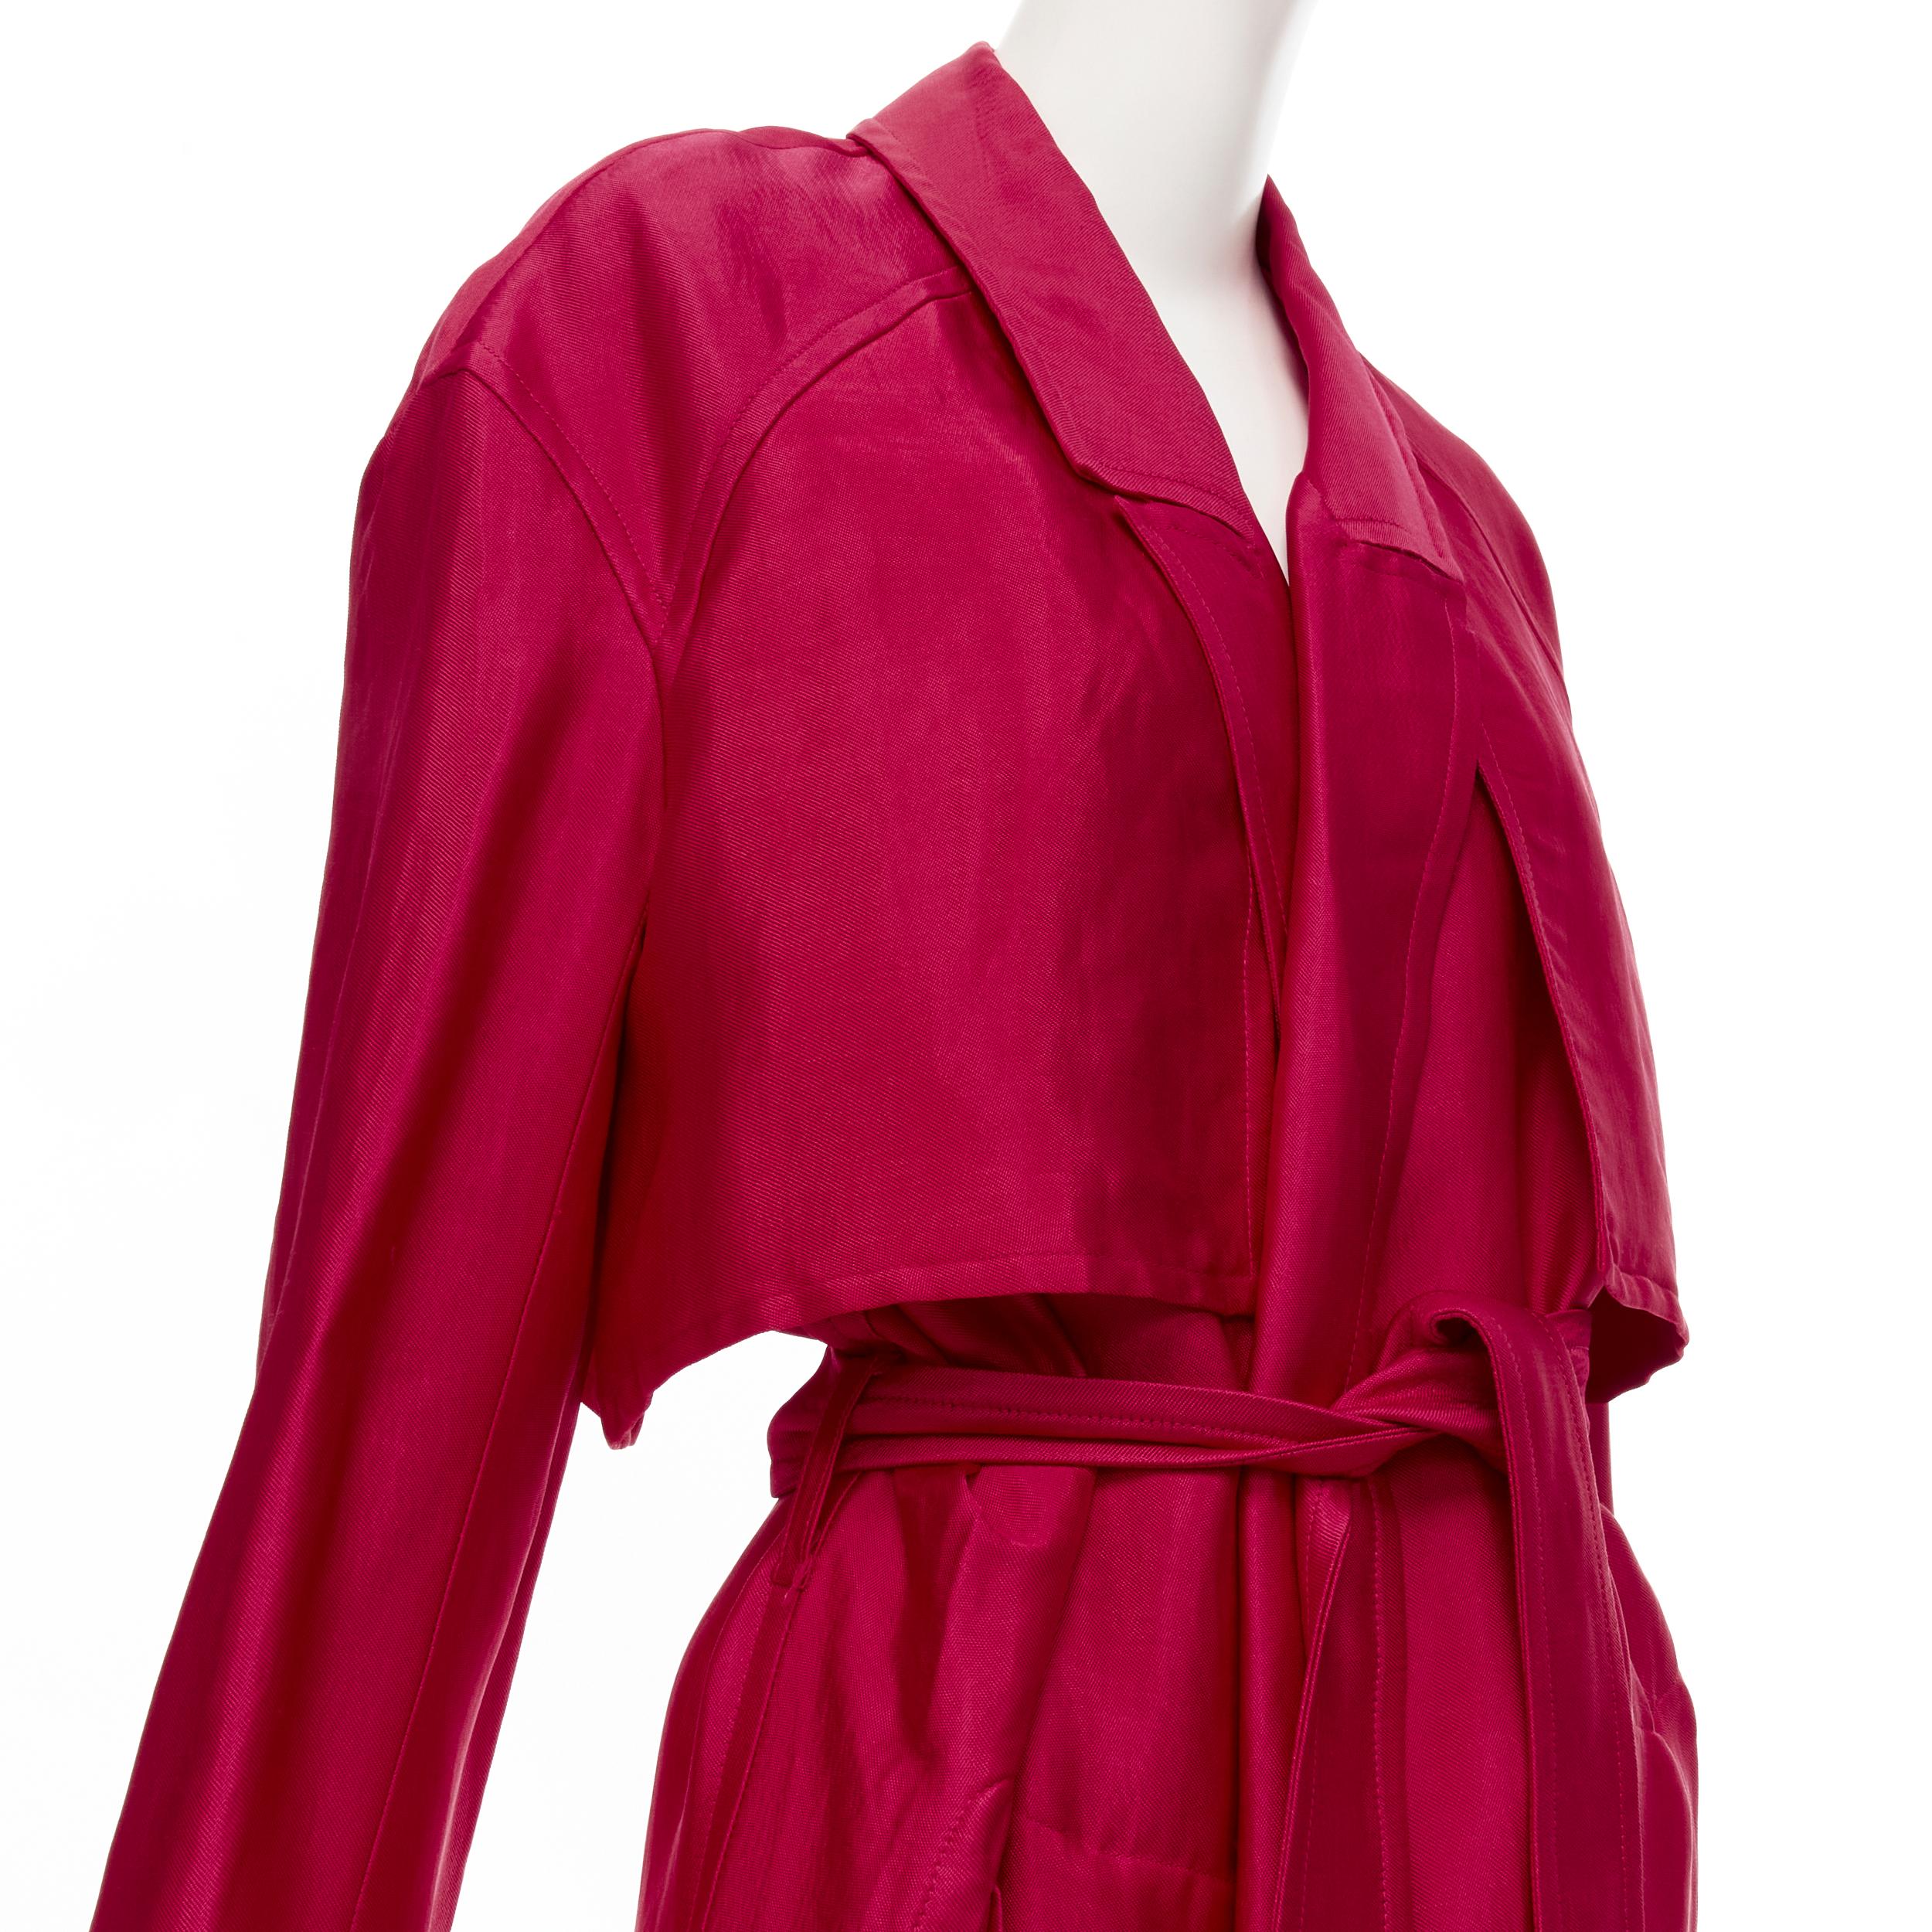 HAIDER ACKERMANN Fuschia pink linen rayon flap layered robe coat FR34 XS 
Reference: EDTG/A00069 
Brand: Haider Ackermann 
Designer: Haider Ackermann 
Material: Linen 
Color: Pink 
Pattern: Solid 
Closure: Belt 
Extra Detail: Notched shawl collar.